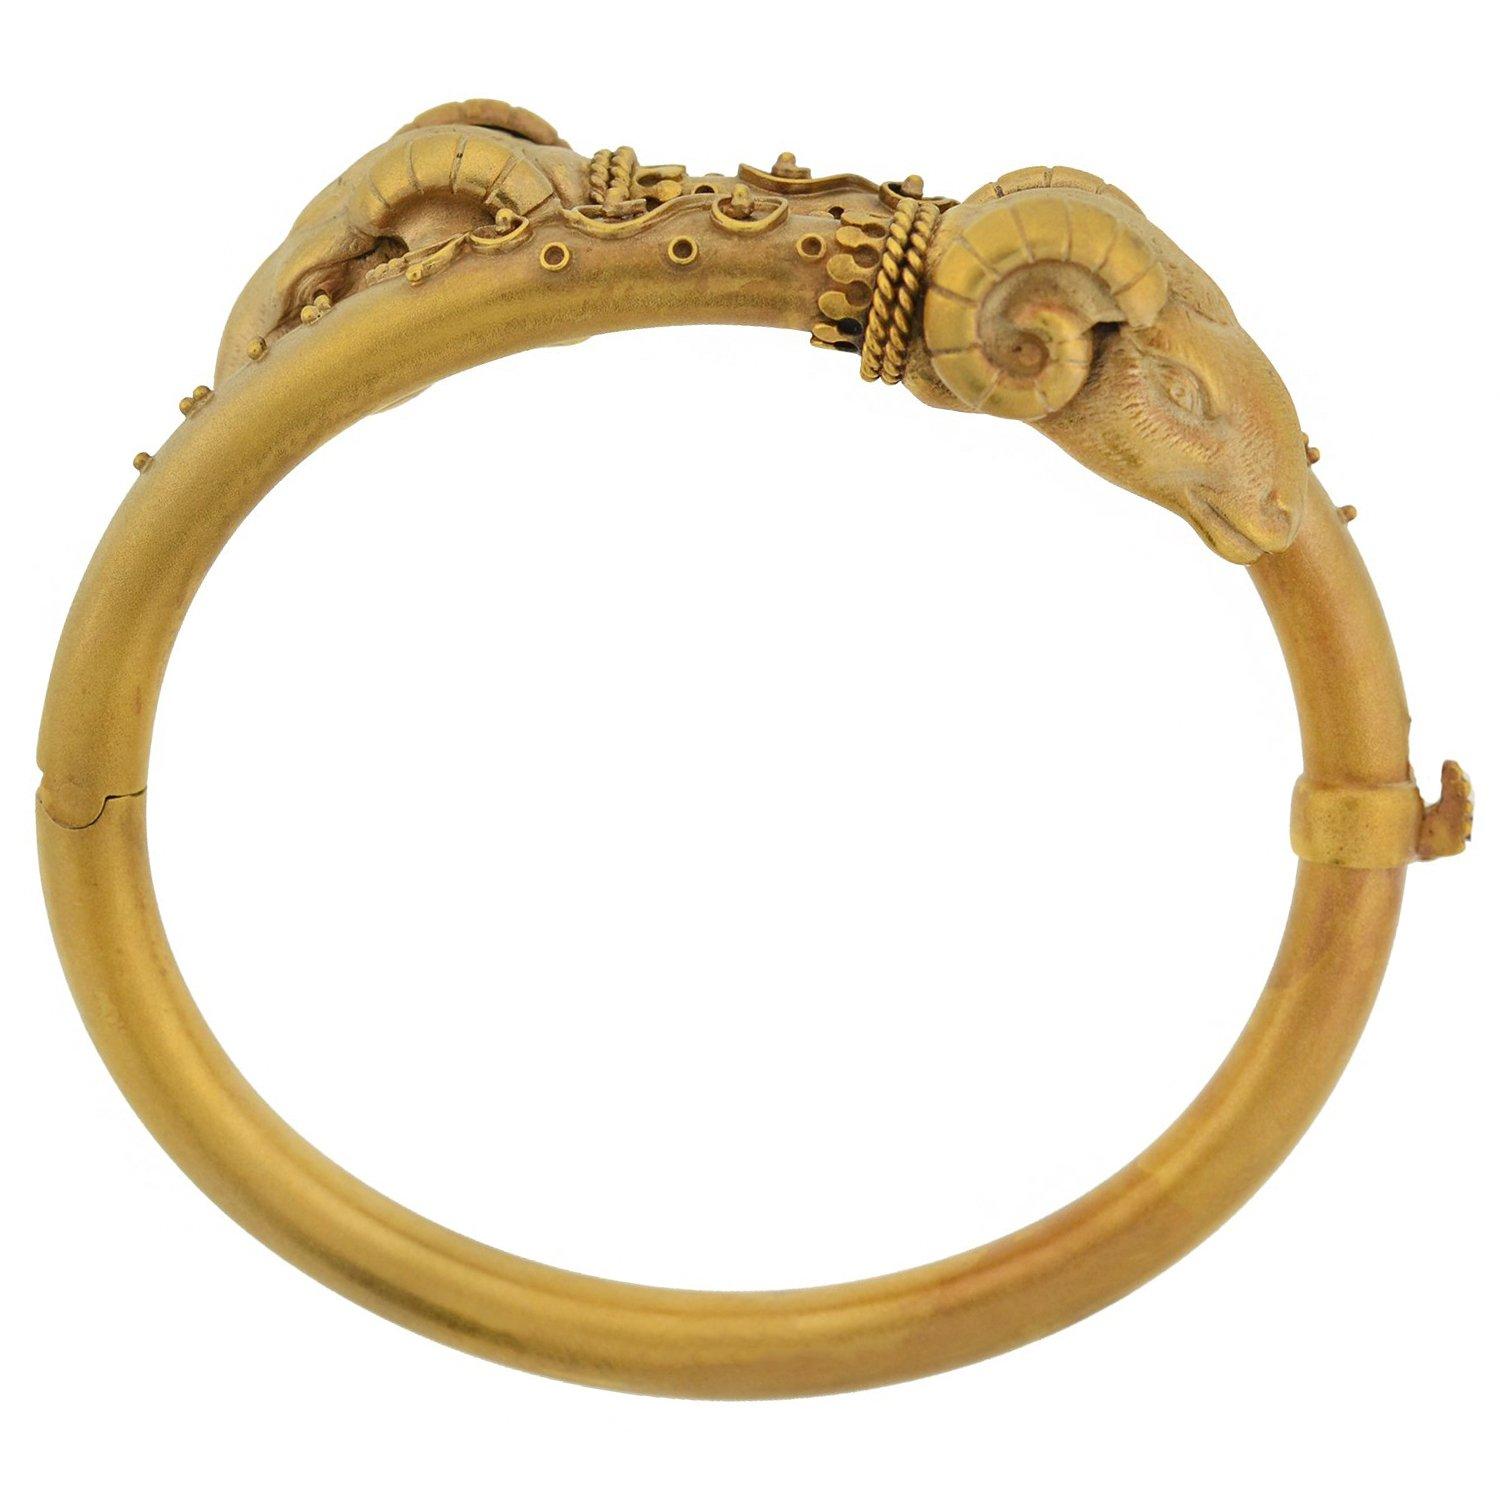 An impressive statement bracelet from the Victorian (ca1880) era! Crafted in 14kt gold, the bangle incorporates a double ram's head motif into a stylish bypass design. Each 3-dimensional ram's head is incredibly detailed, including curling horns,